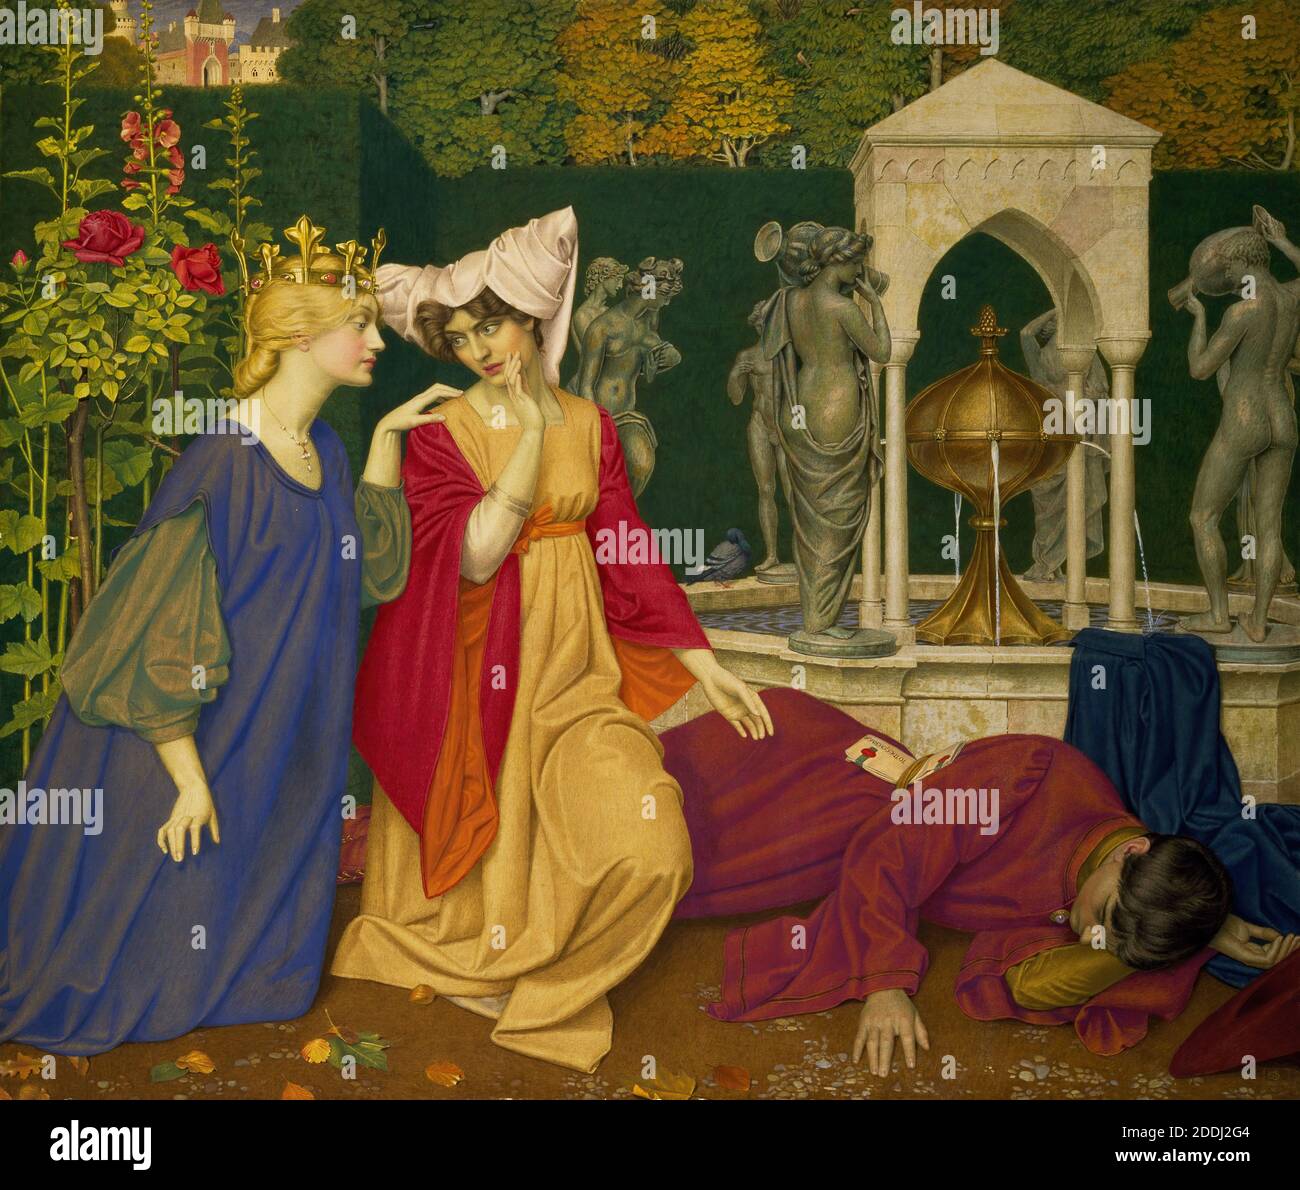 Changing the Letter, 1908, Joseph Edward Southall, The subject is taken from the poem 'The Man Born to be King' from William Morris's 'The Earthly Paradise'. The sealed letter is addressed 'To The Governor Stock Photo